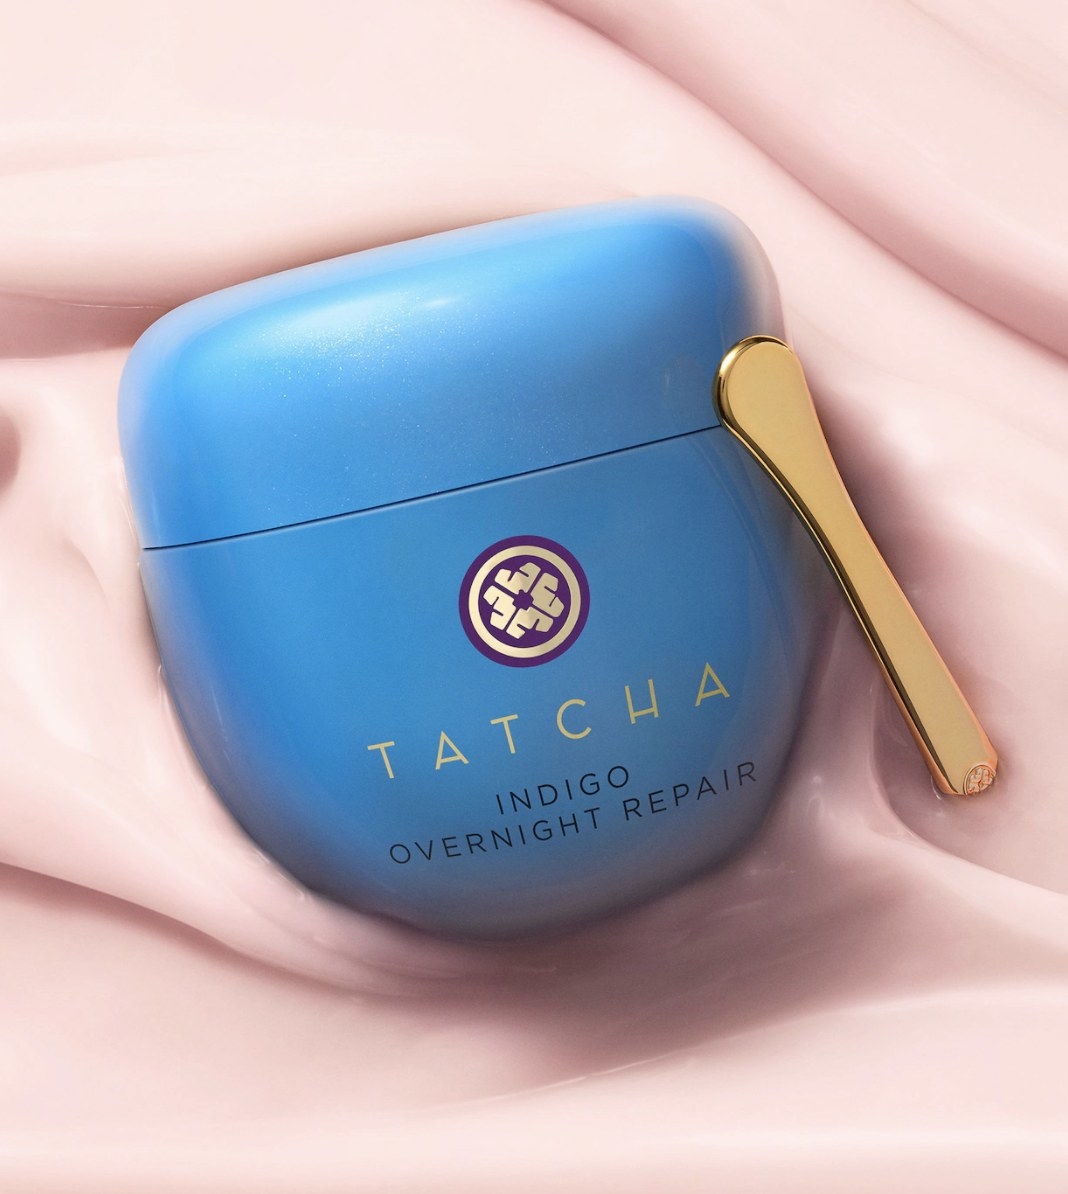 The blue container has a purple and gold emblem and says &quot;TATCHA INDIGO OVERNIGHT REPAIR&quot; and has a small gold spatula